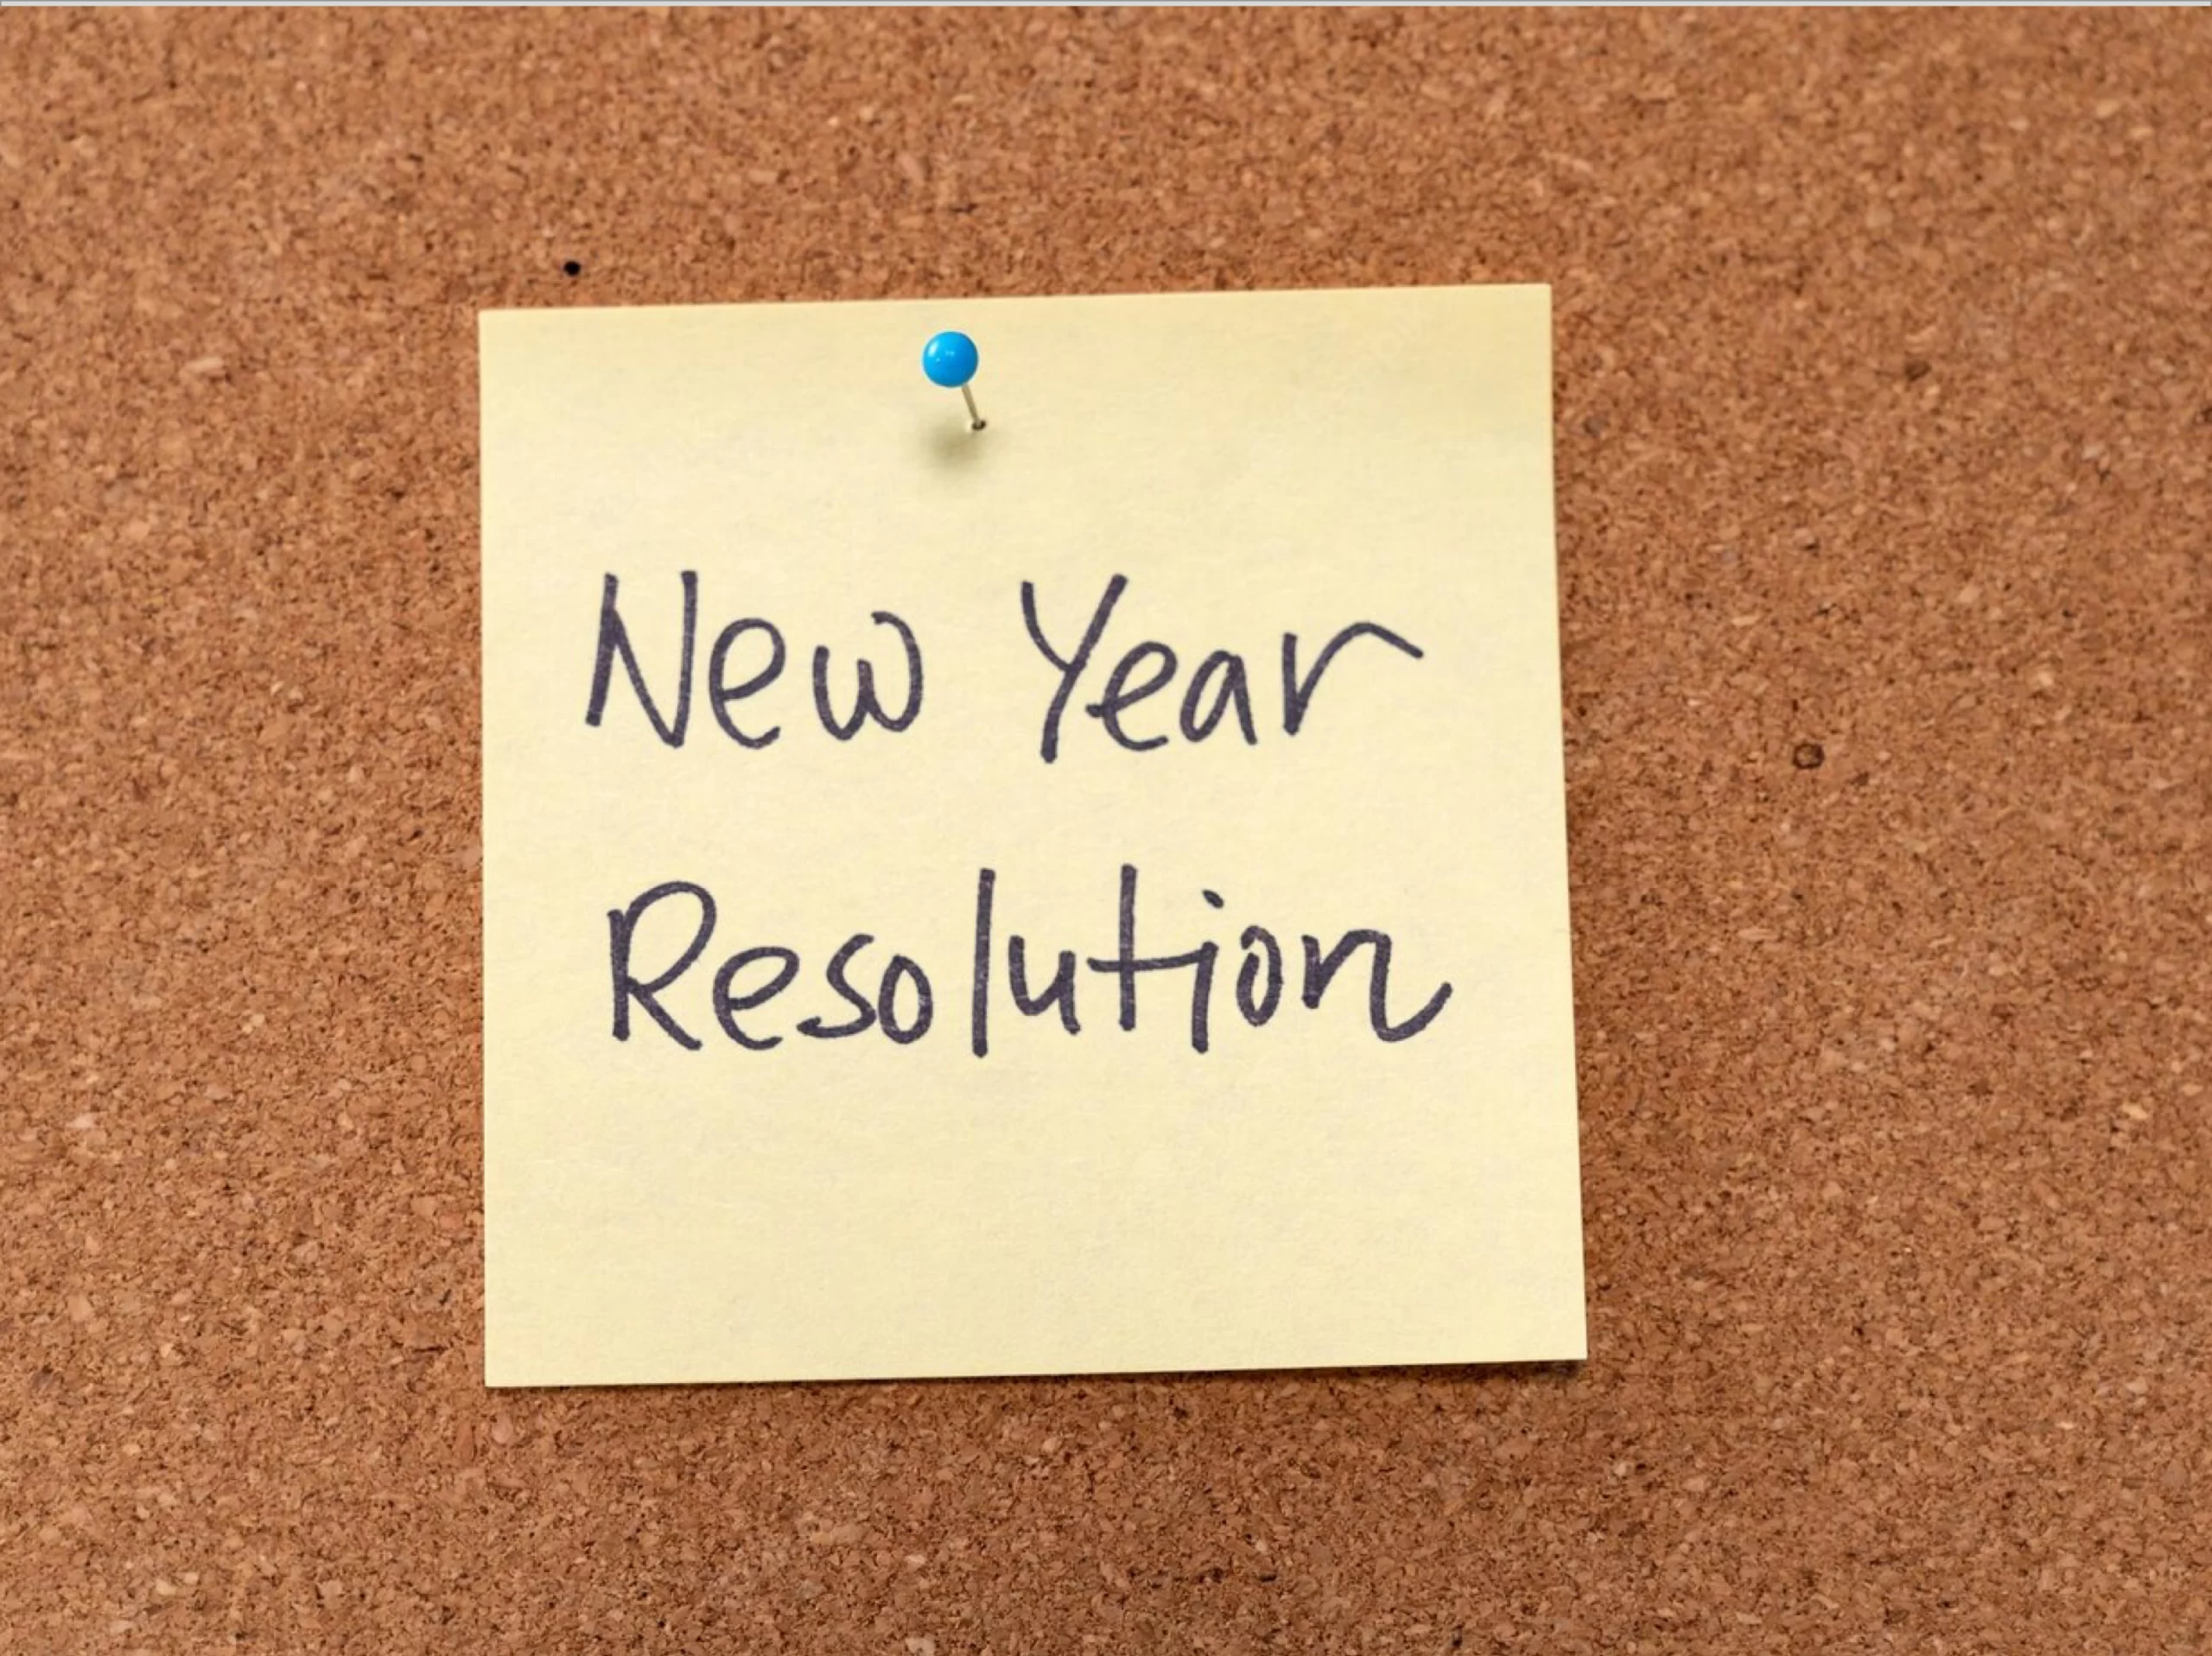 Why Do People Make New Year’s Resolutions?